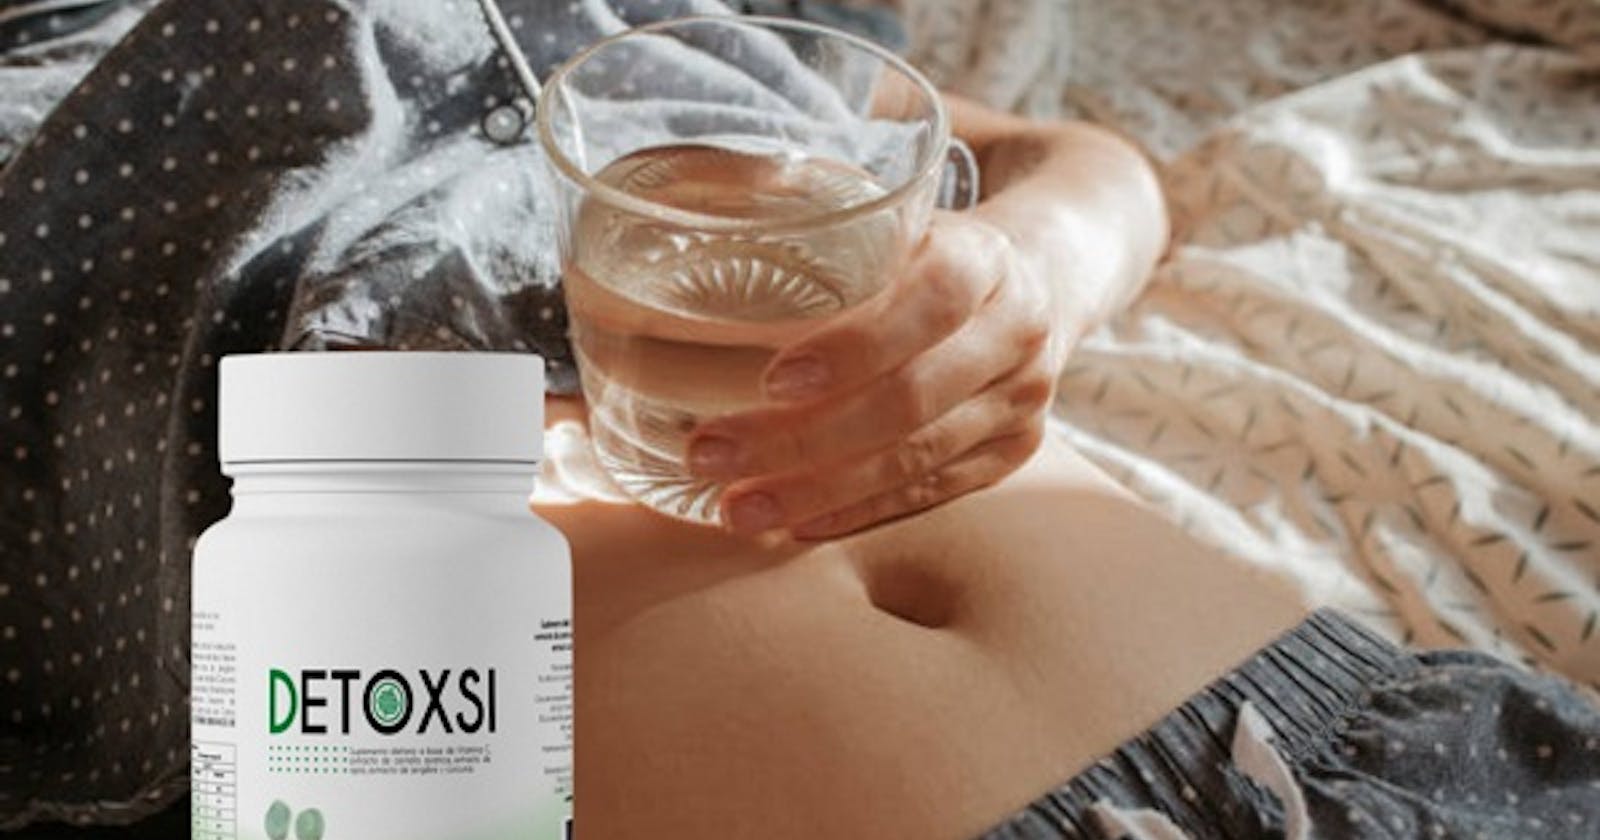 Detoxsi : Is popular Weight Loss Supplement Scam Or Legit?